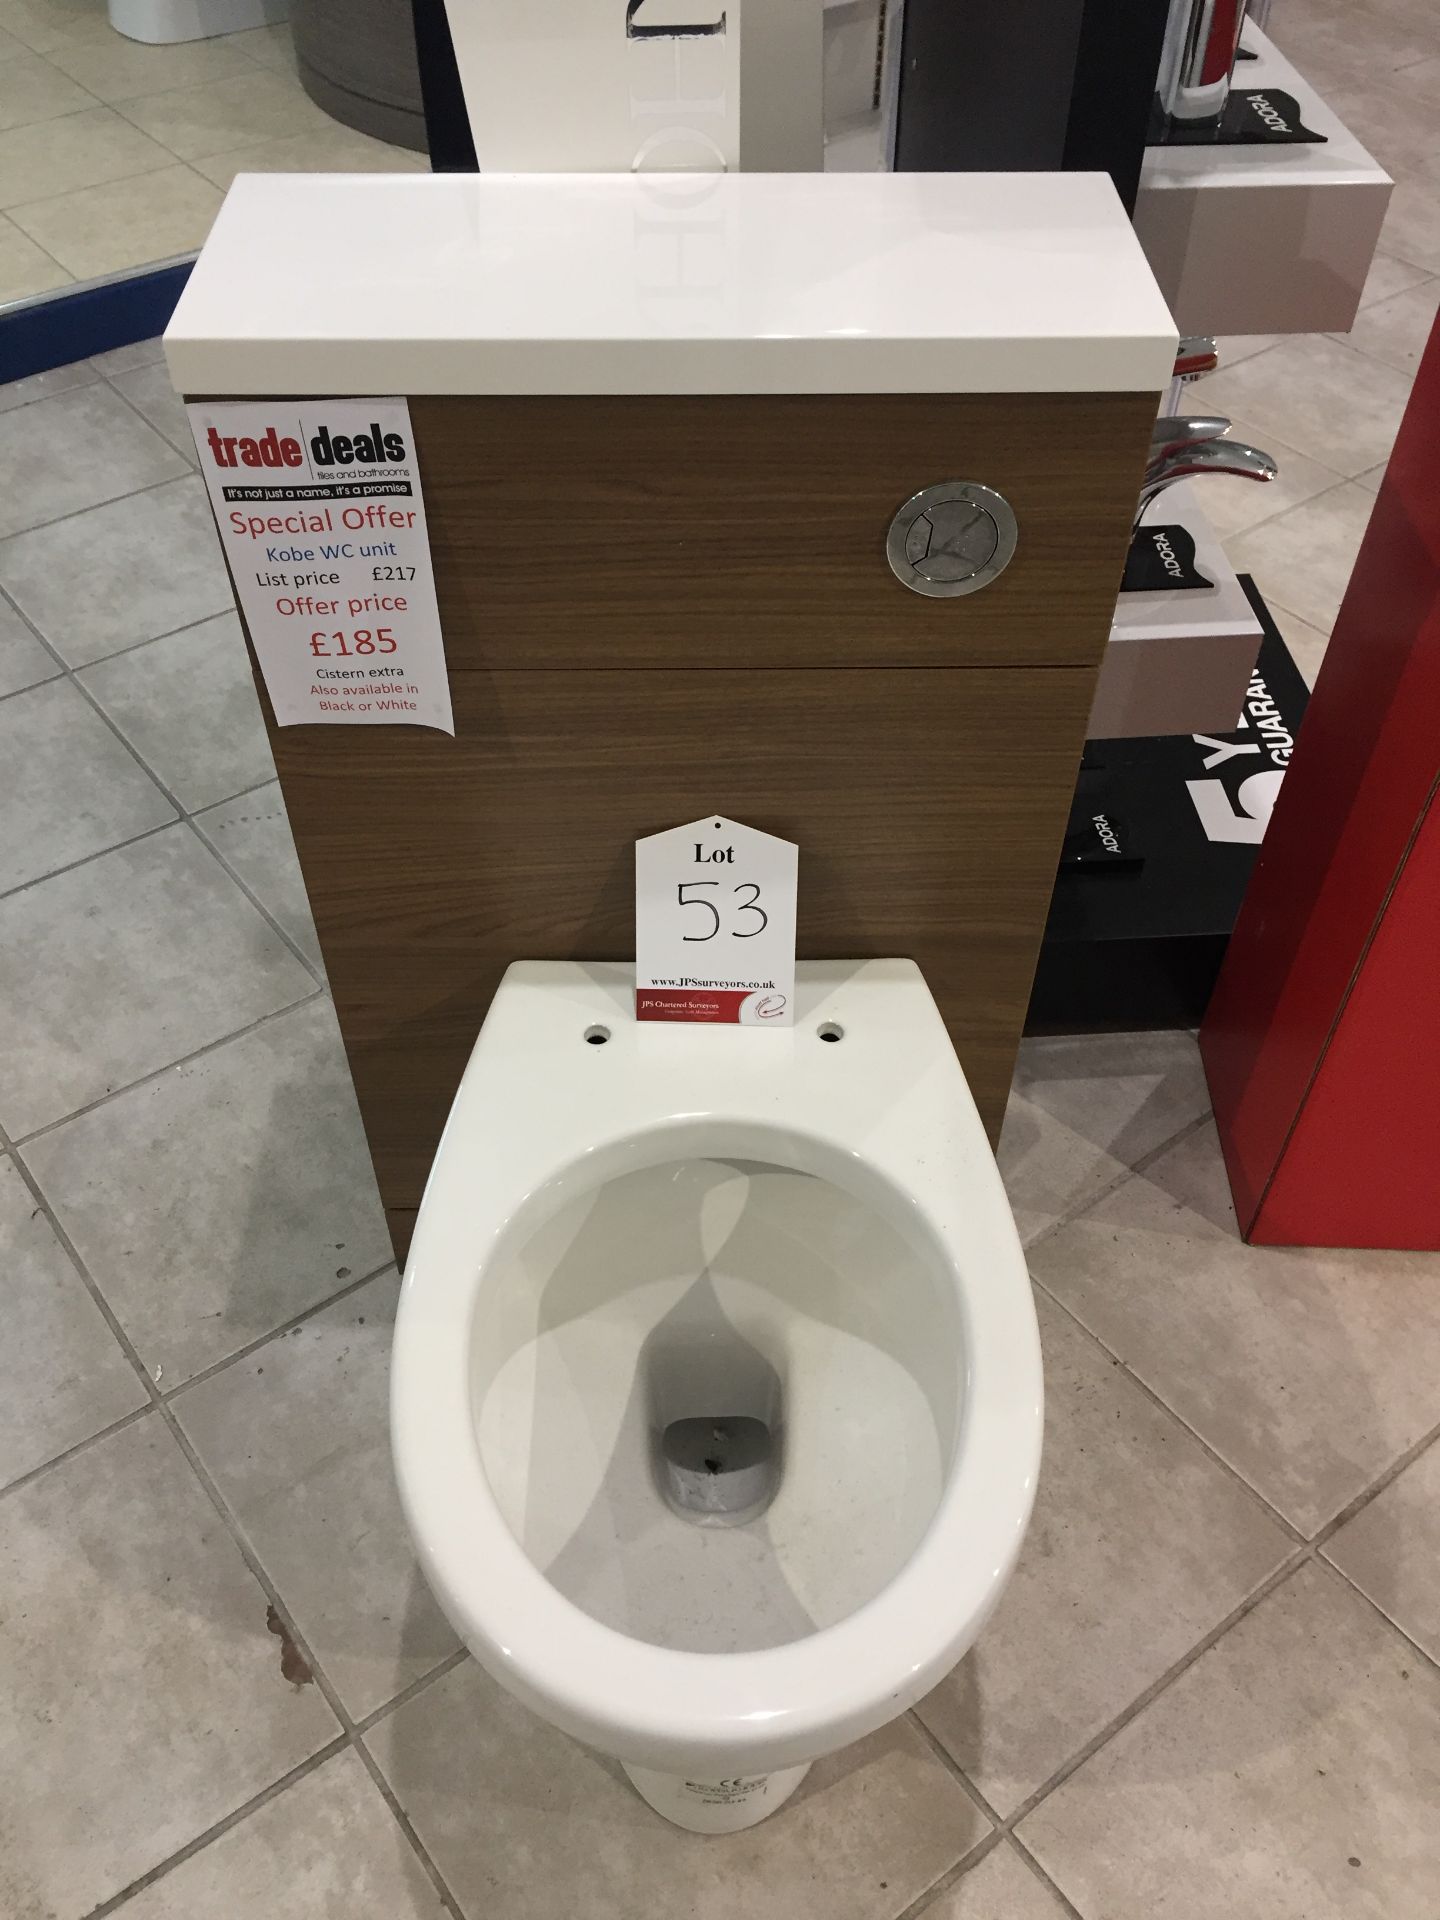 Kobe 500mm WC unit (NO SEAT) £217 reduced to £185